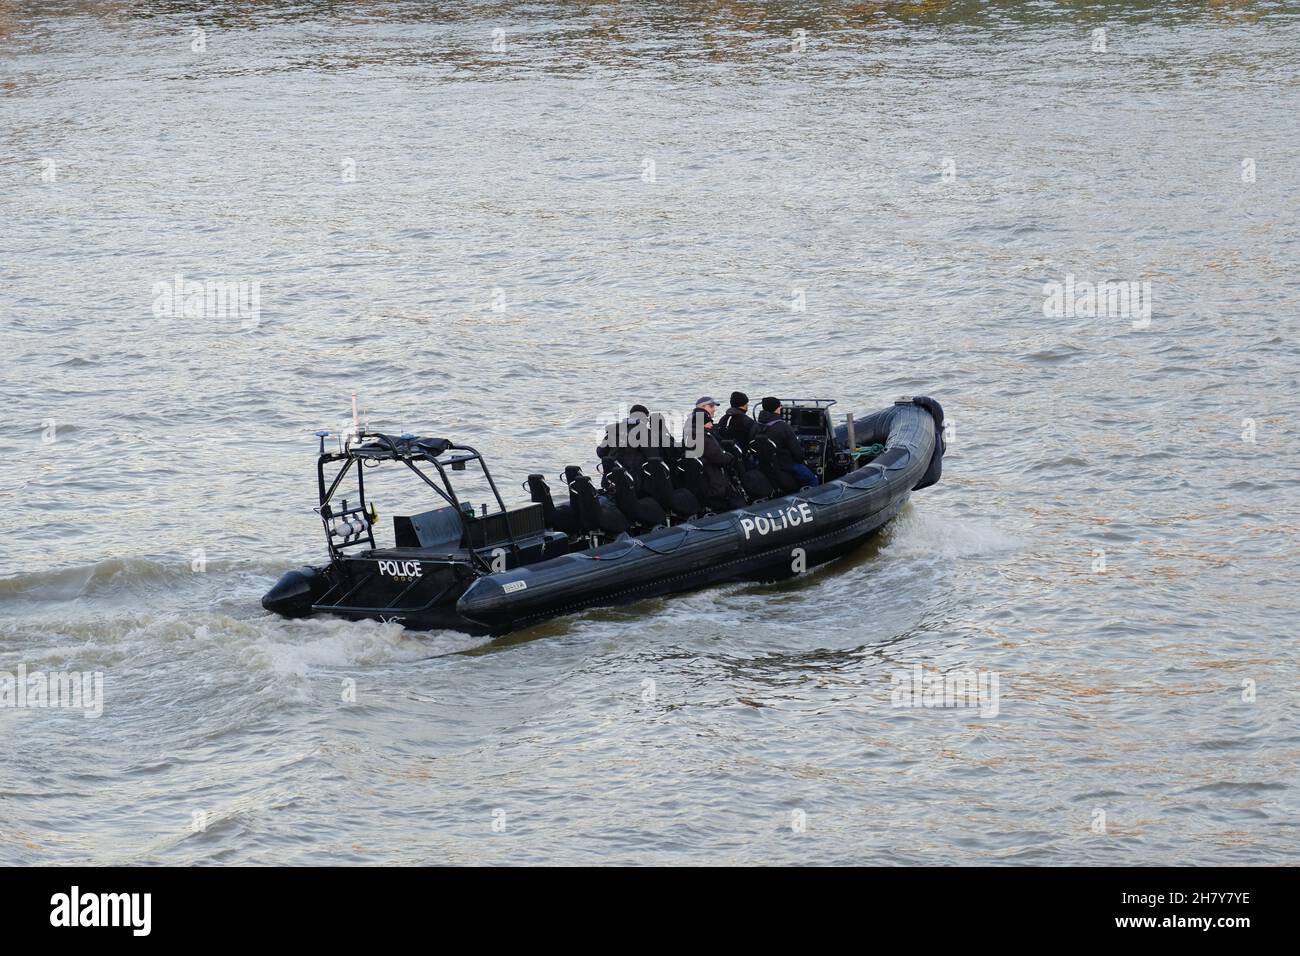 London, UK. A police boat patrols the River Thames as UK terrorism threat level is raised from substantial to severe after Liverpool taxi explosion. Stock Photo